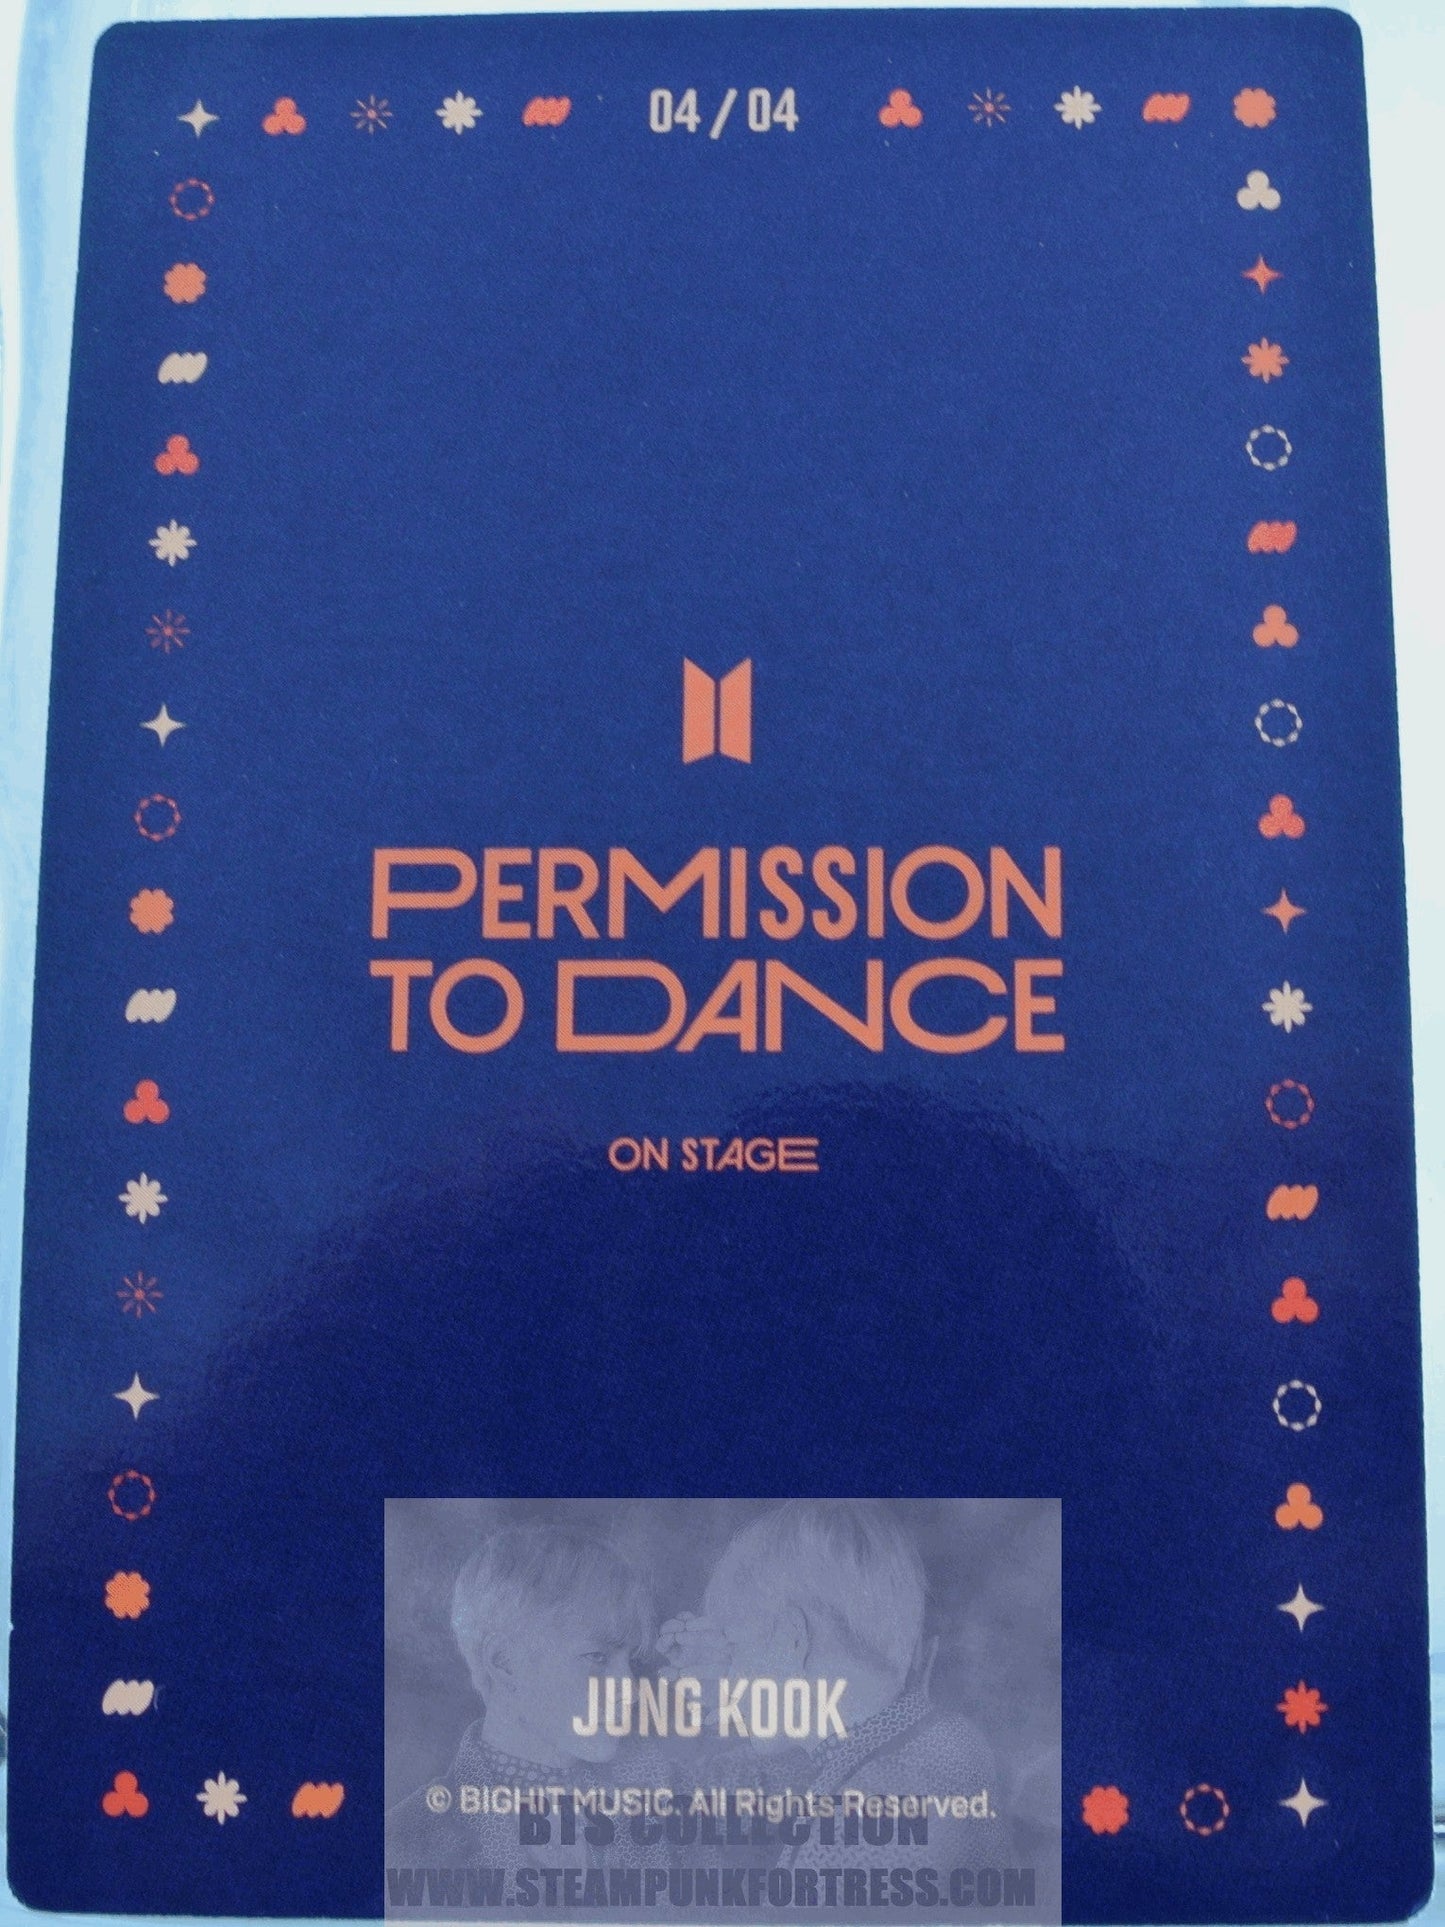 BTS JUNGKOOK JEON JUNG-KOOK PTD 2022 PERMISSION TO DANCE ON STAGE SEOUL PHOTOCARD PHOTO CARD PC #4 OF 4 NEW OFFICIAL MERCHANDISE